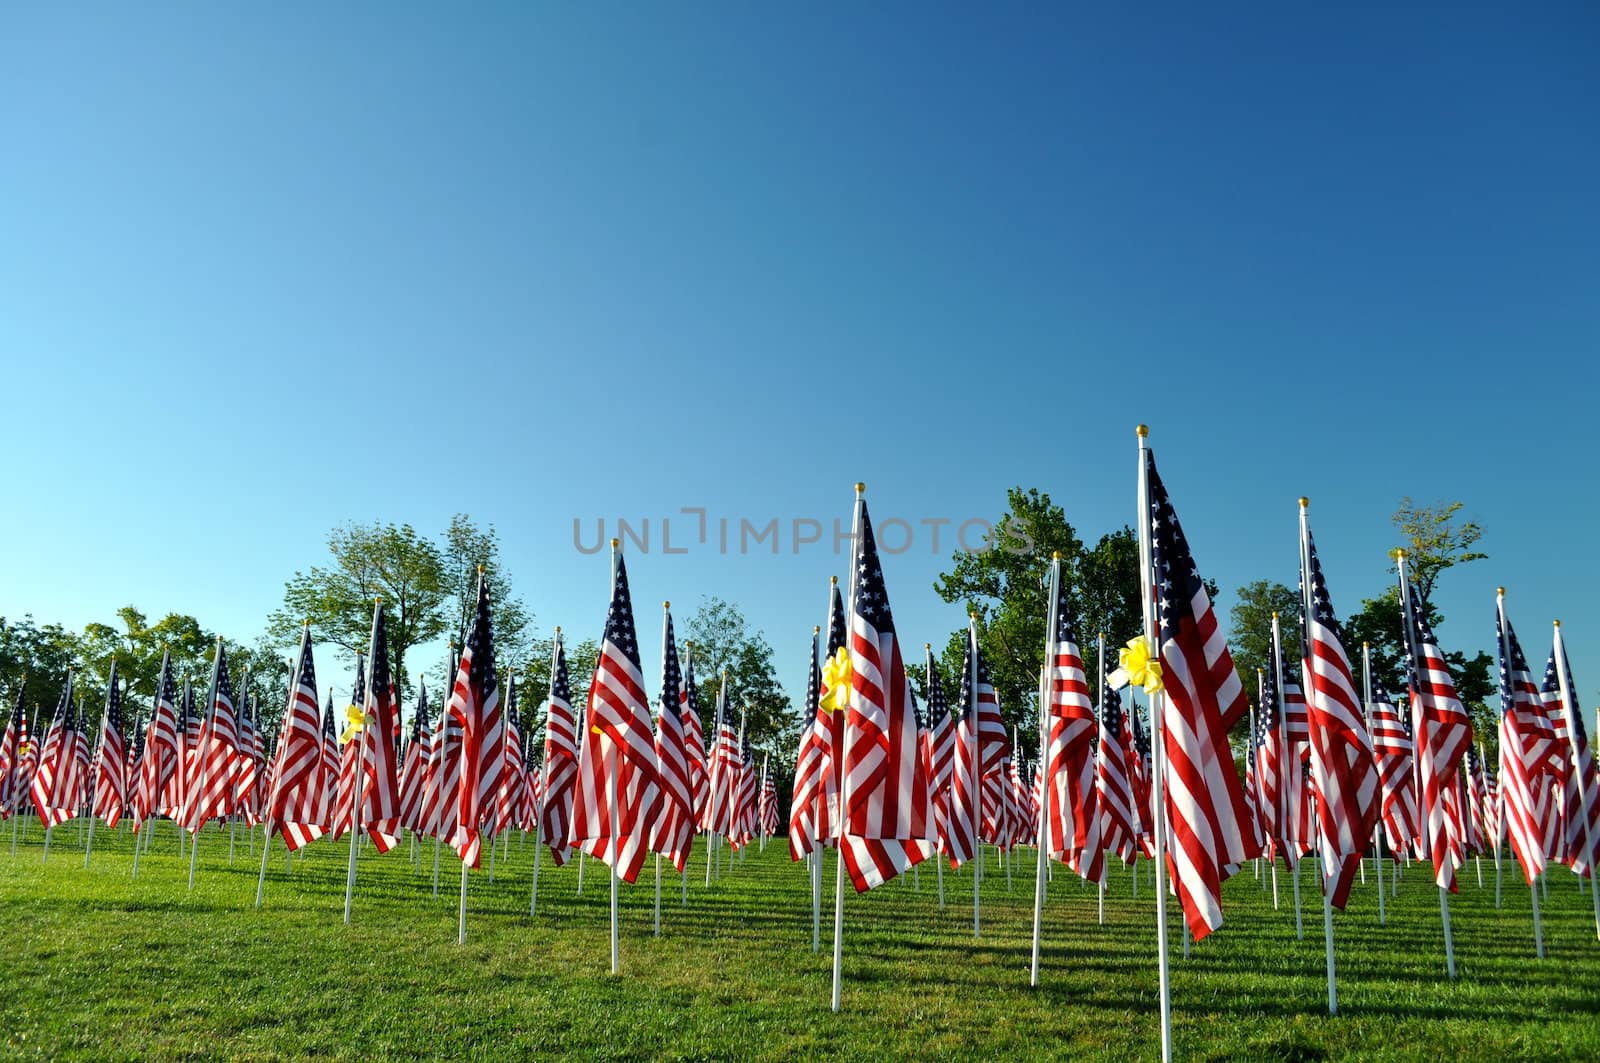 Flags by RefocusPhoto